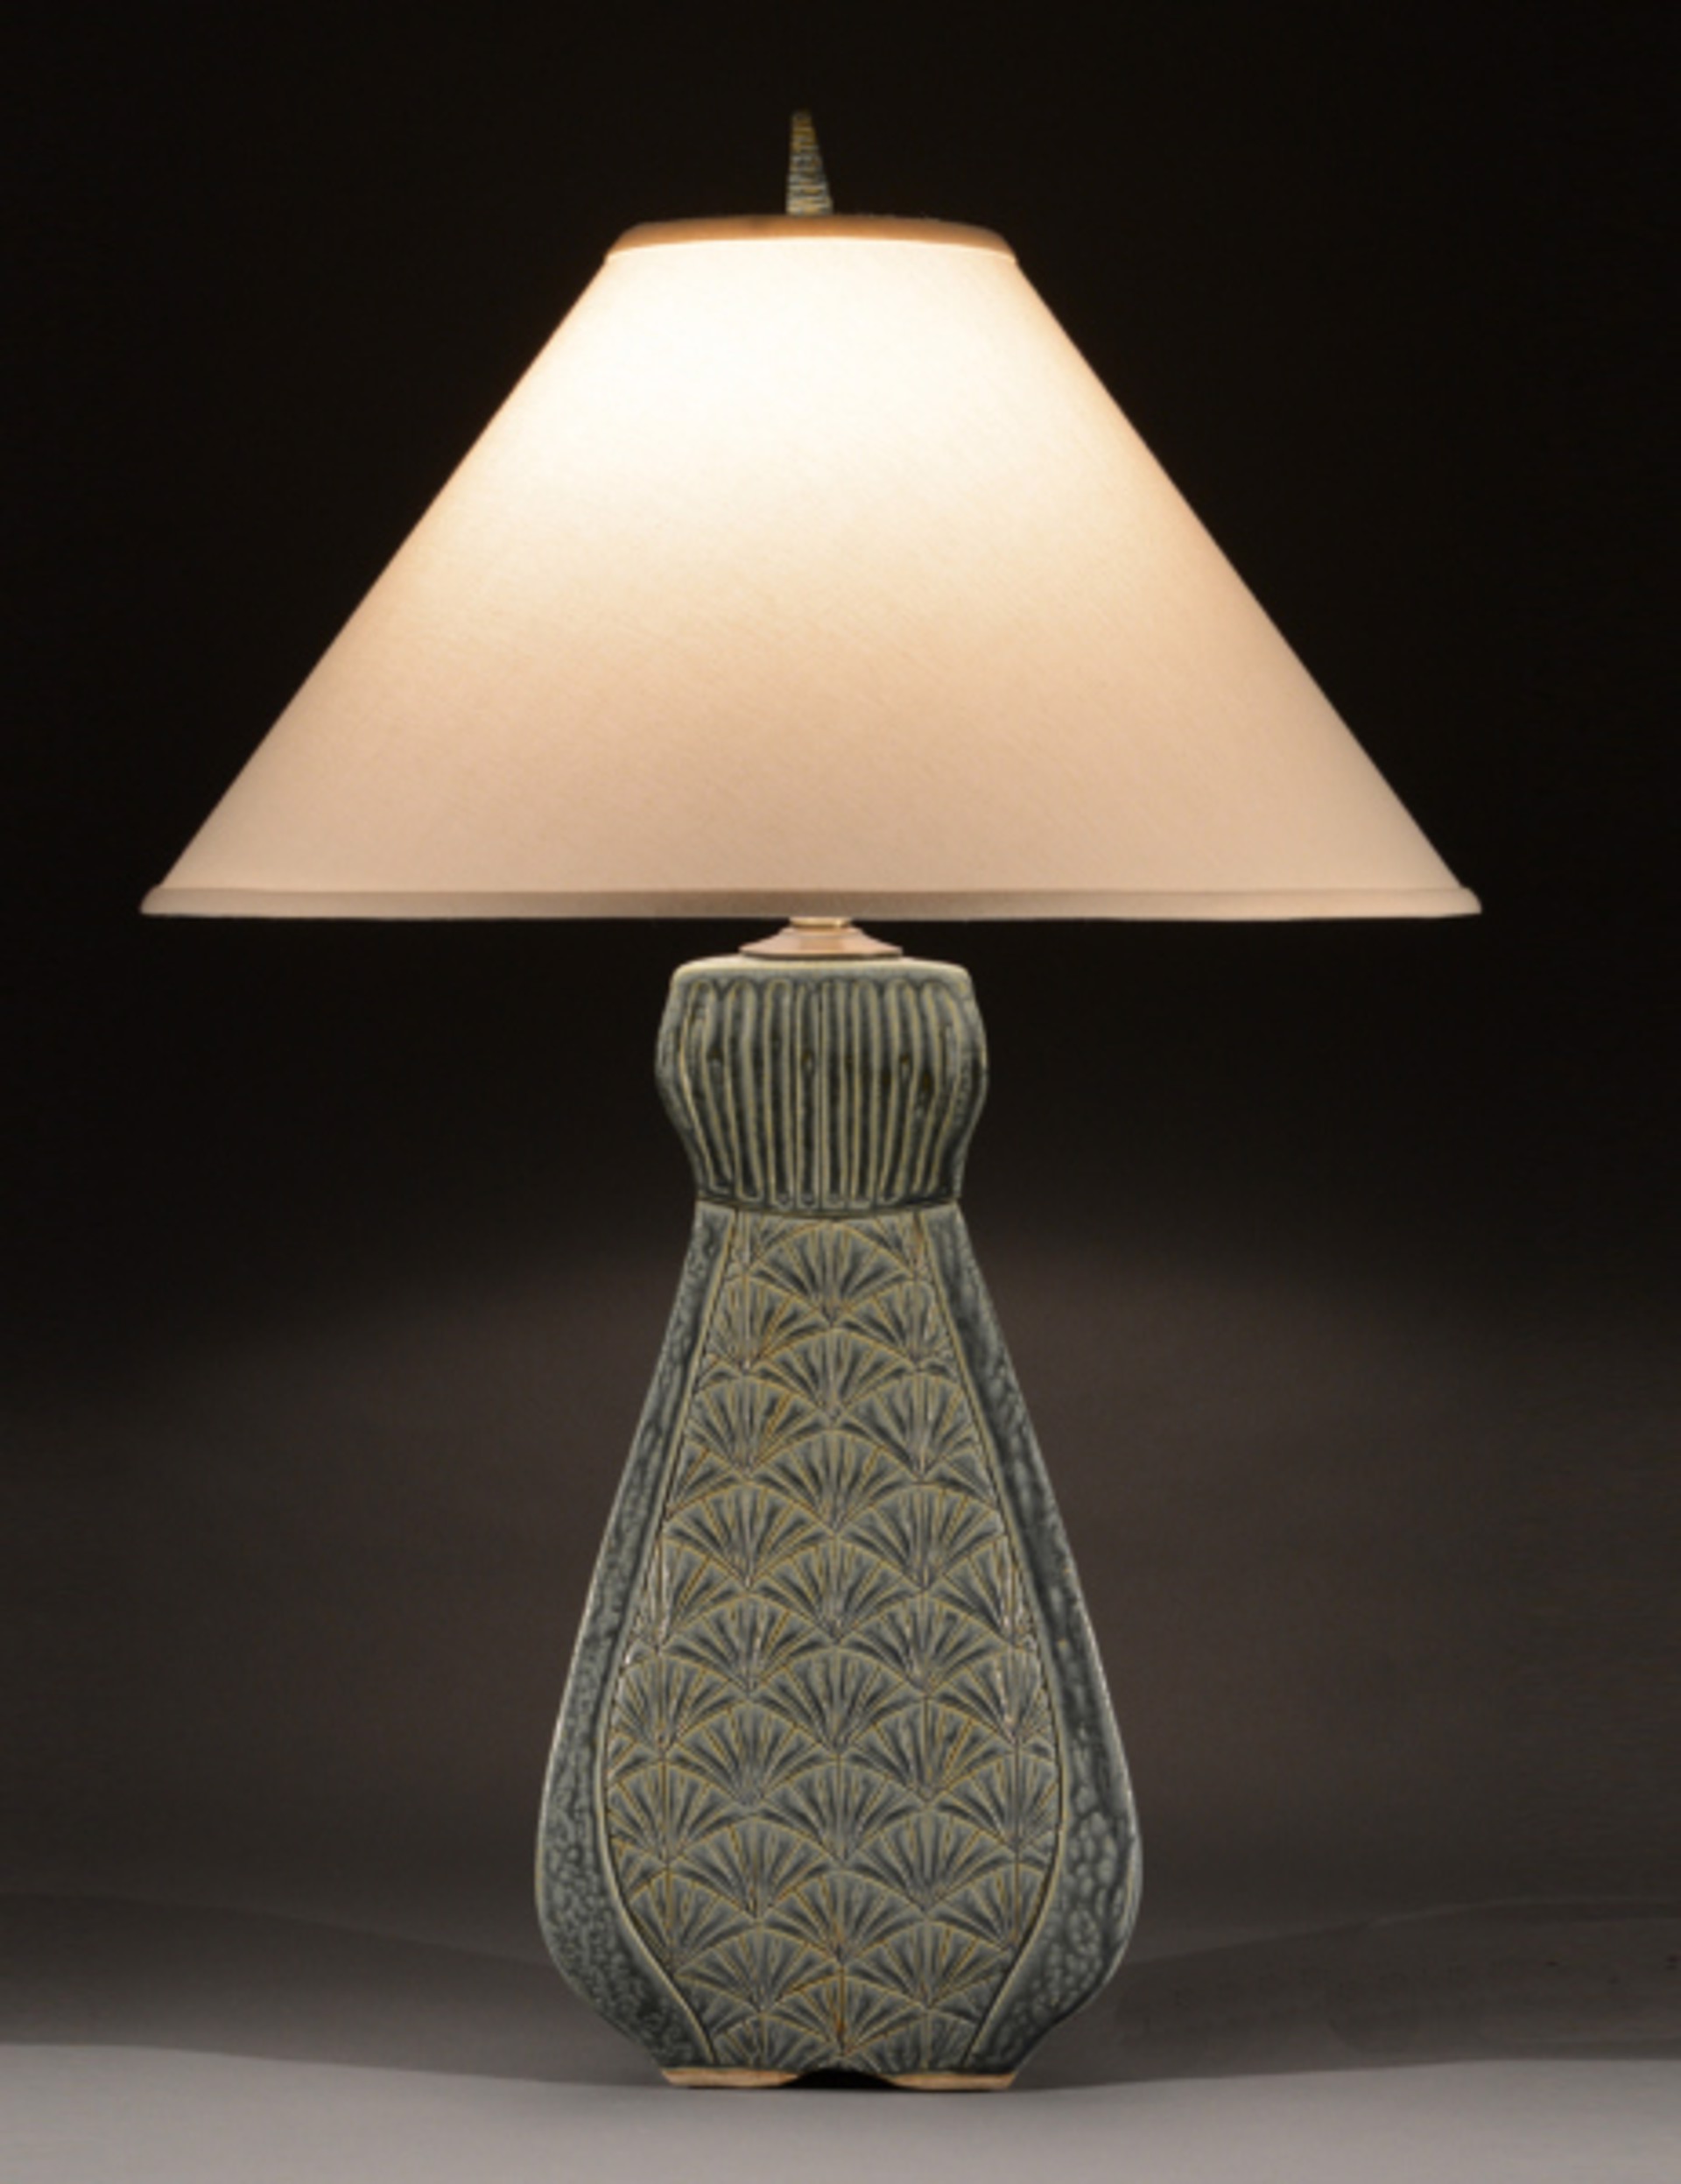 Tall Bulbous Lamp by Jim & Shirl Parmentier